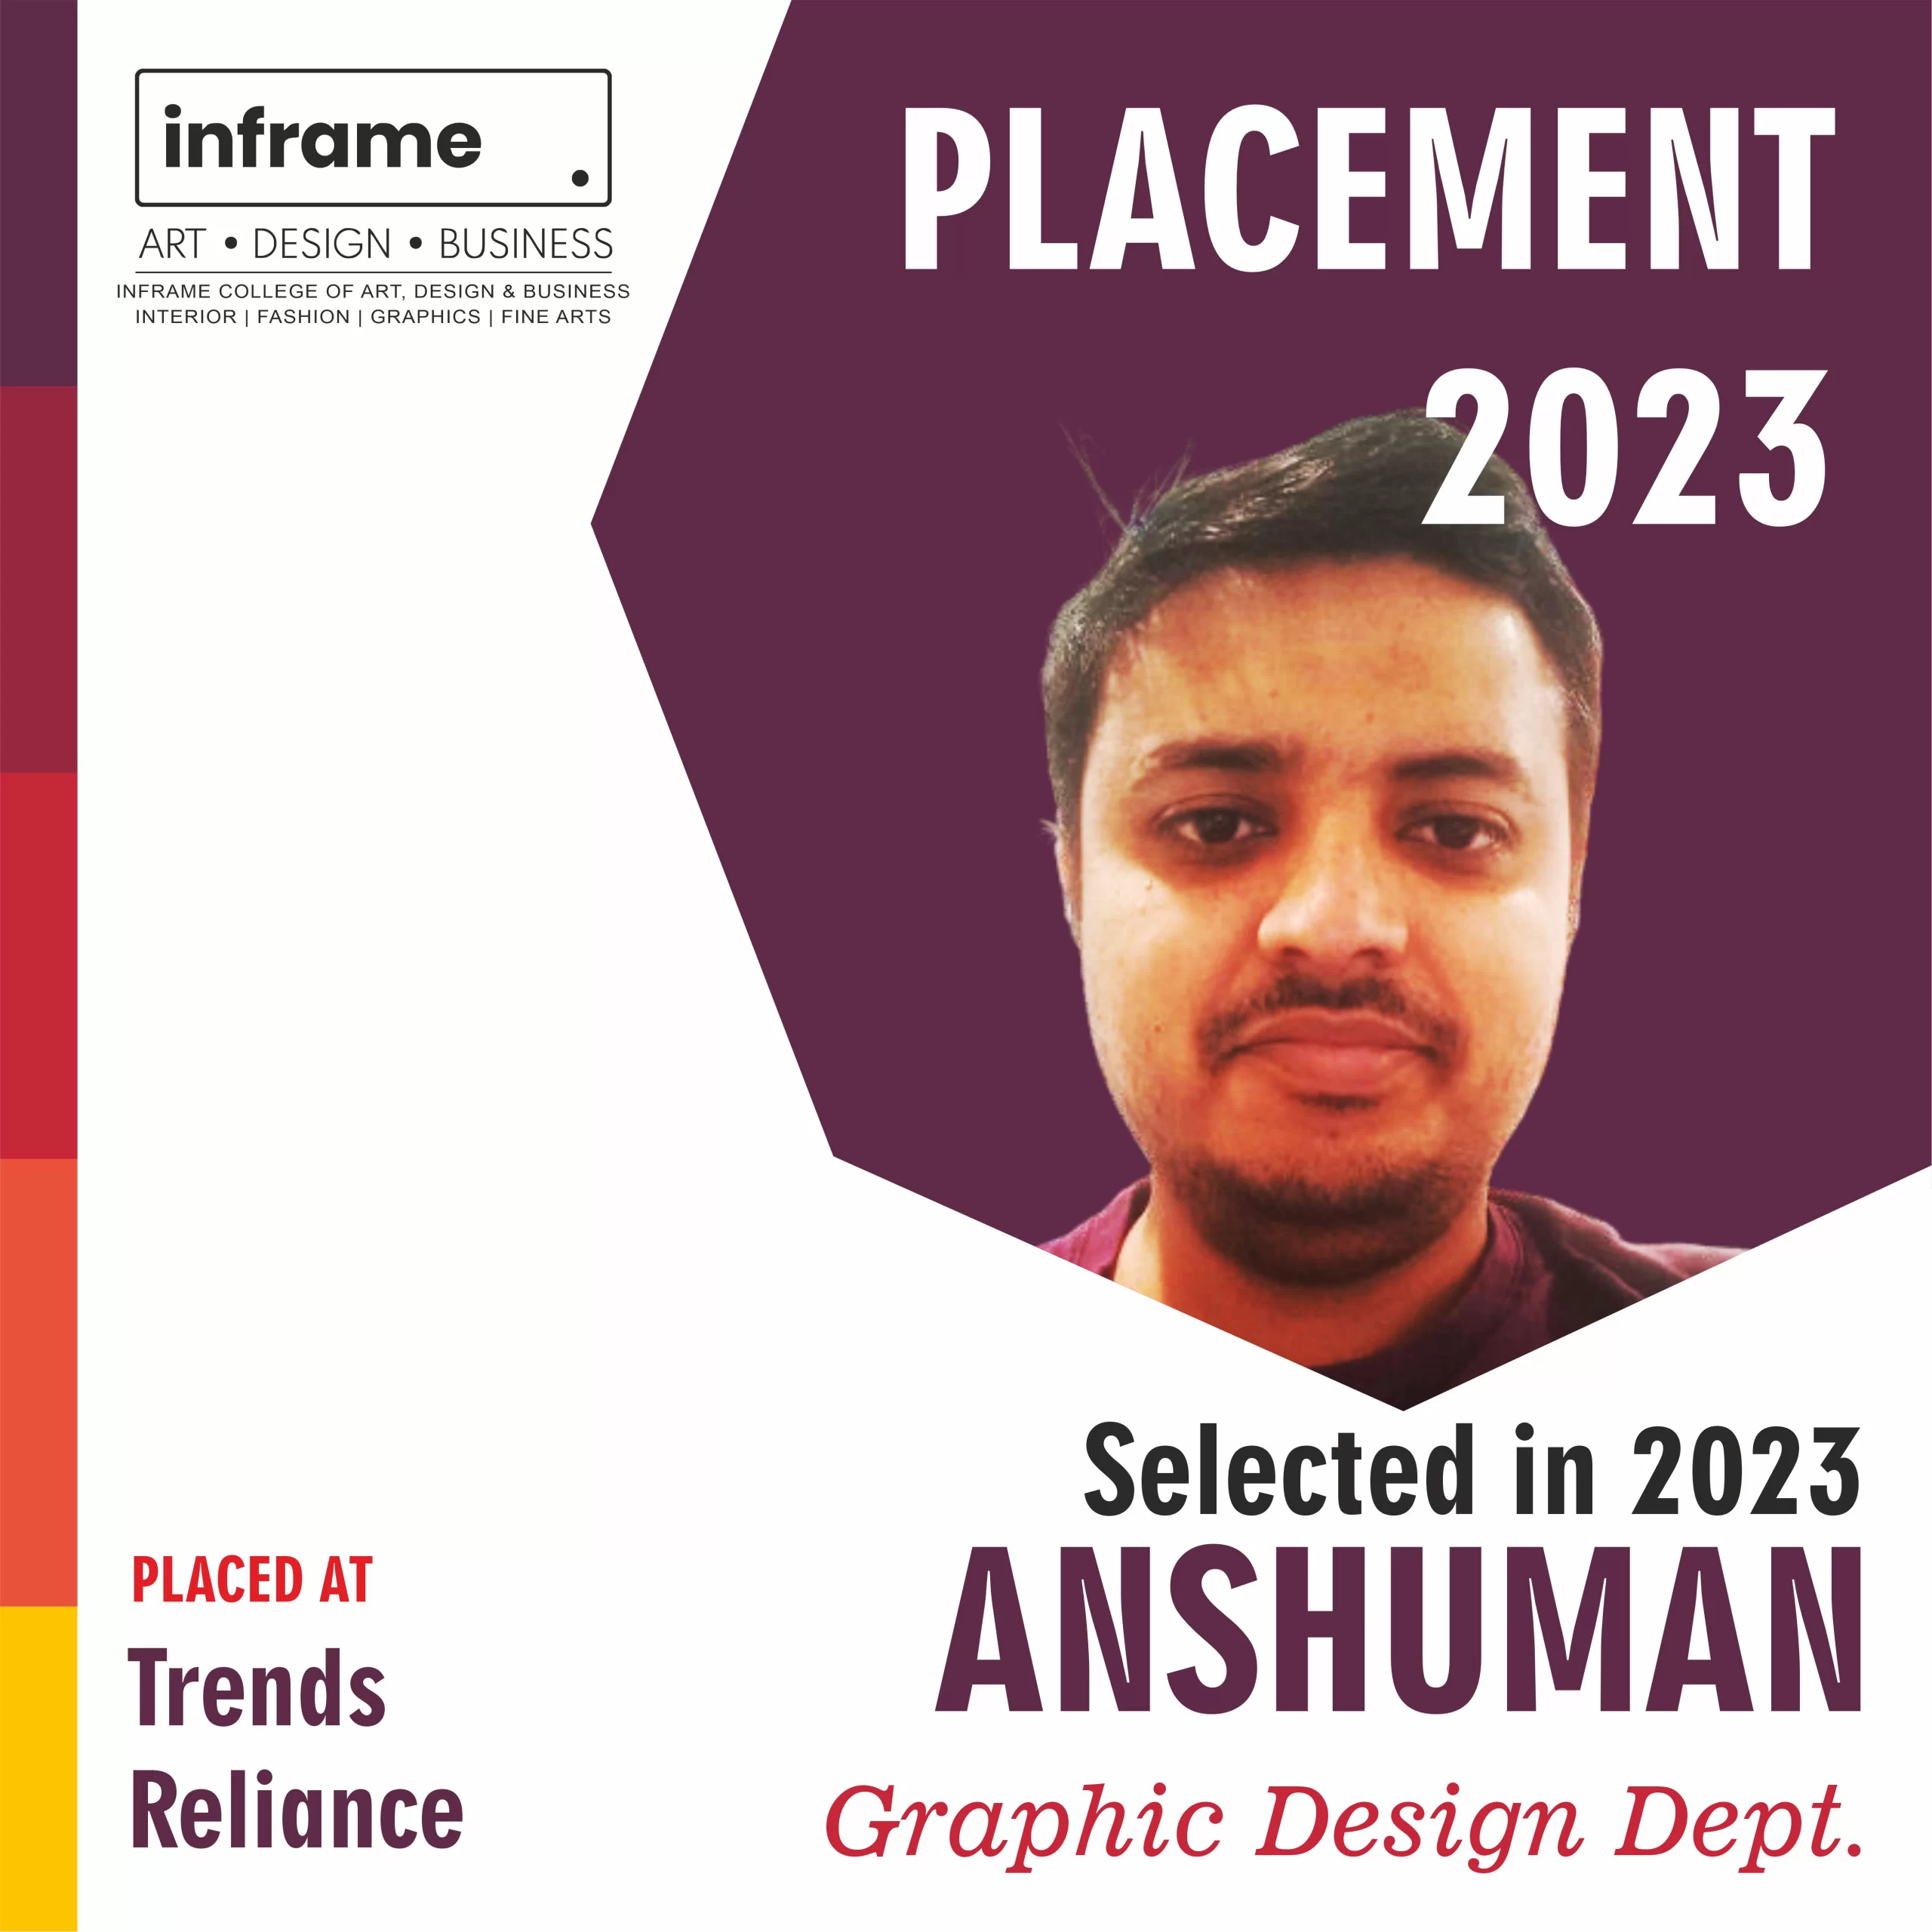 inframe student placement